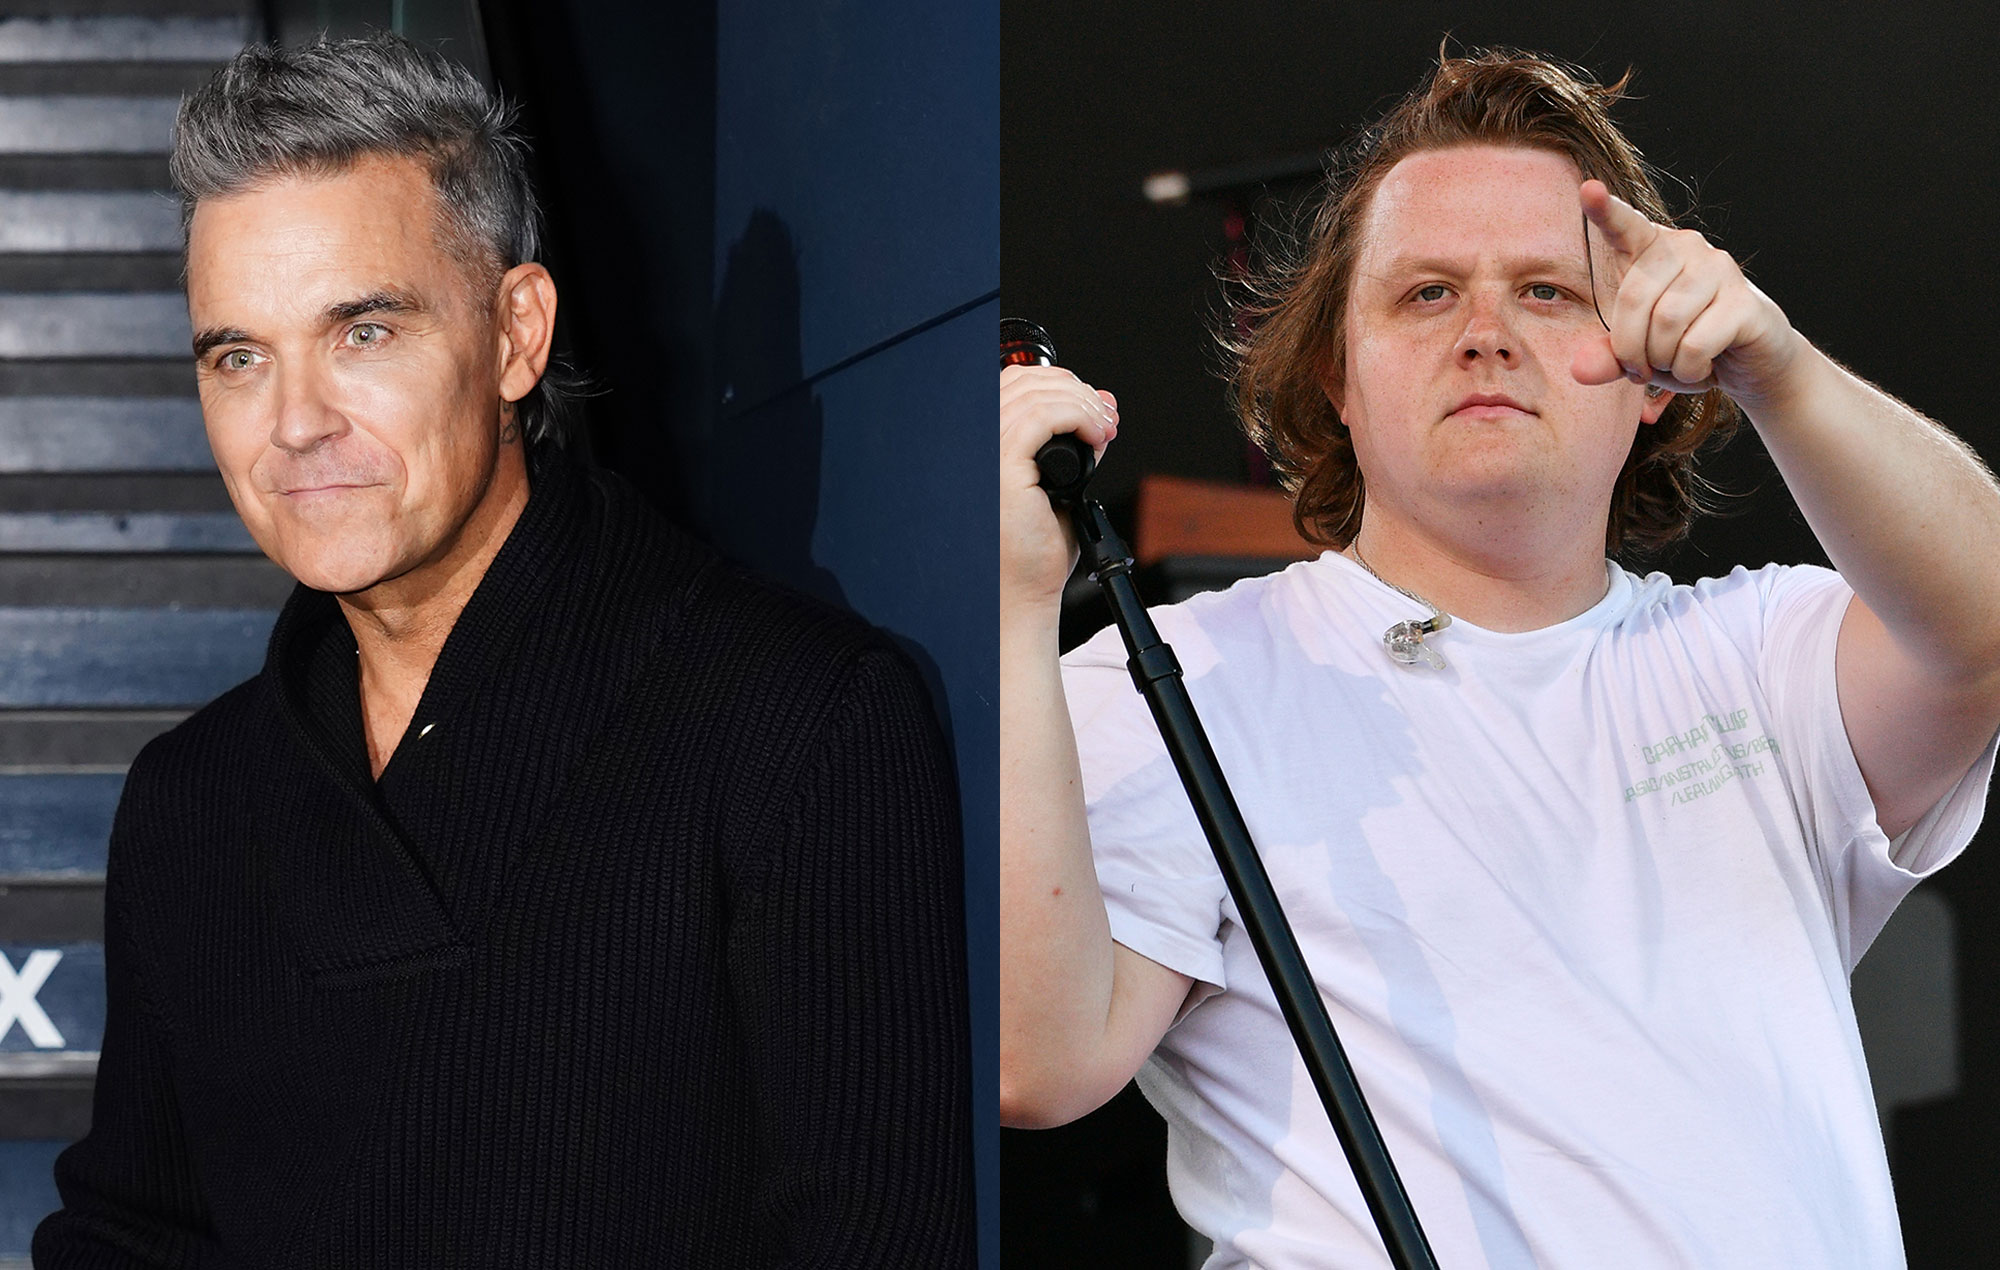 Robbie Williams has reached out to Lewis Capaldi over mental health in music industry struggles